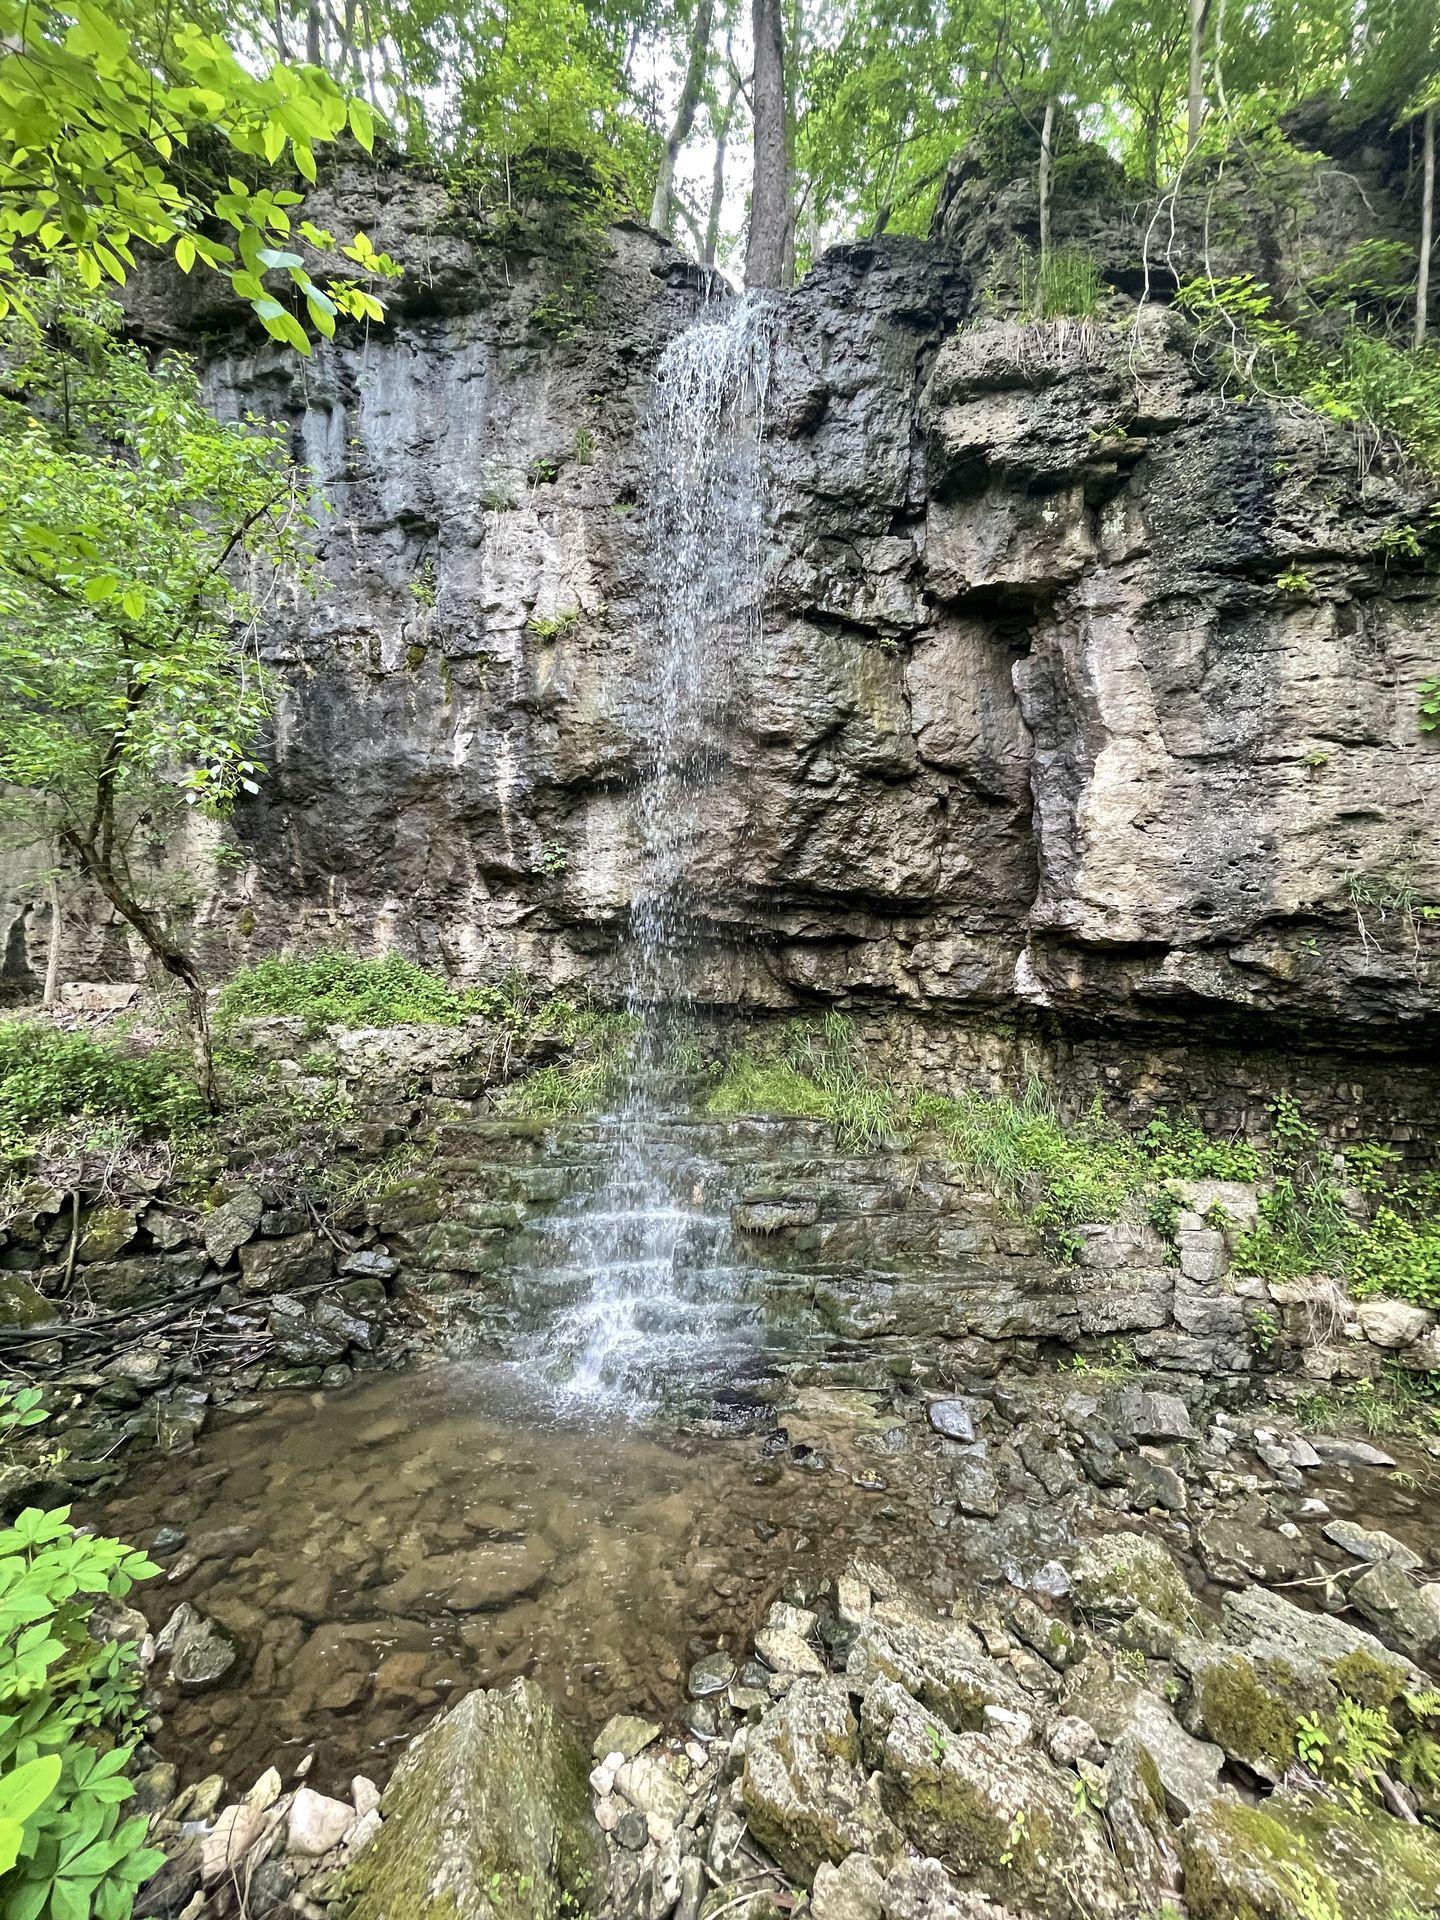 A narrow waterfall falling down a flat rock face in Clifton Gorge State Nature Preserve